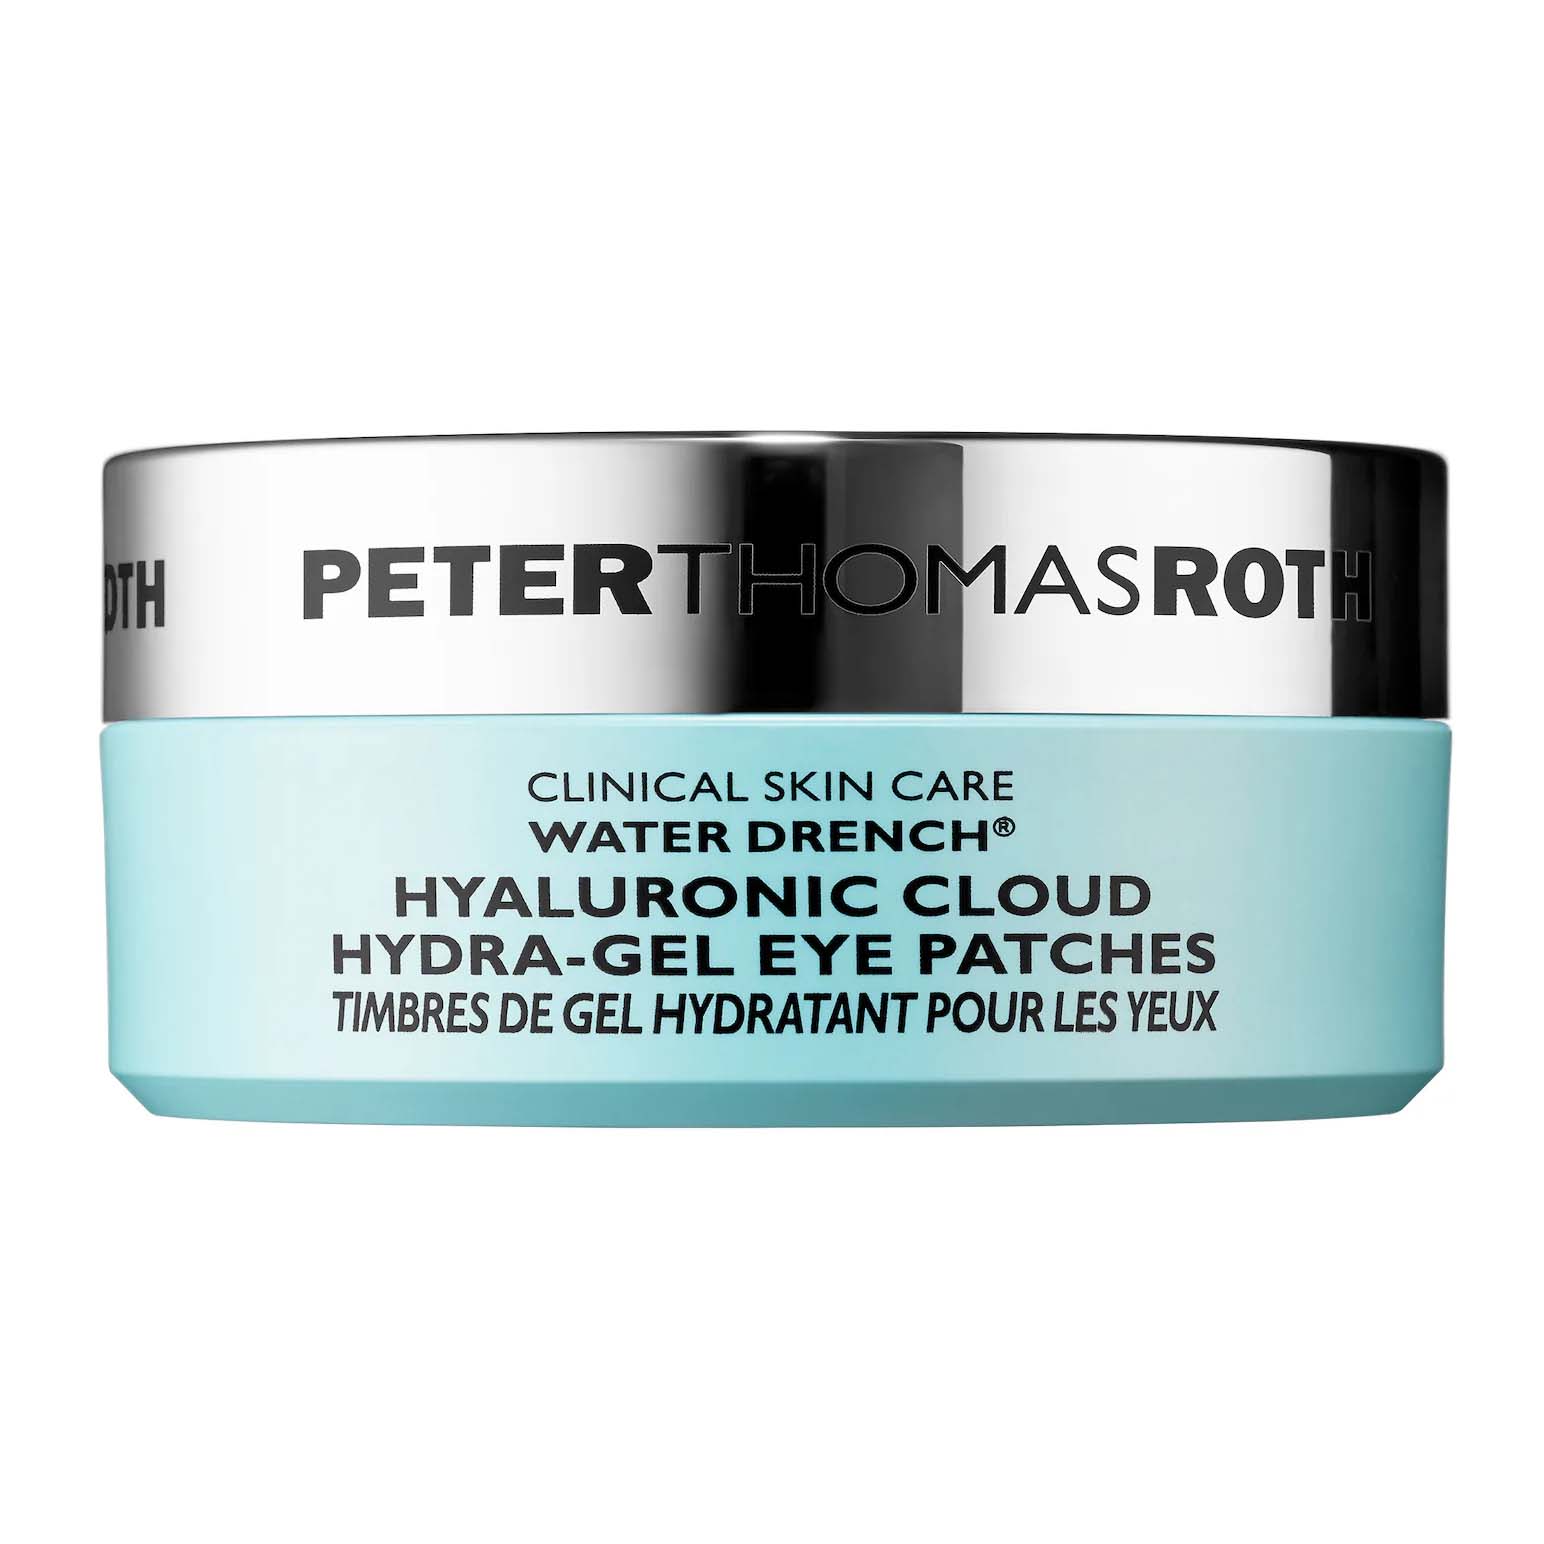 a tub of Peter Thomas Roth Water Drench Hyaluronic Cloud Hydra-Gel Eye Patches in baby blue